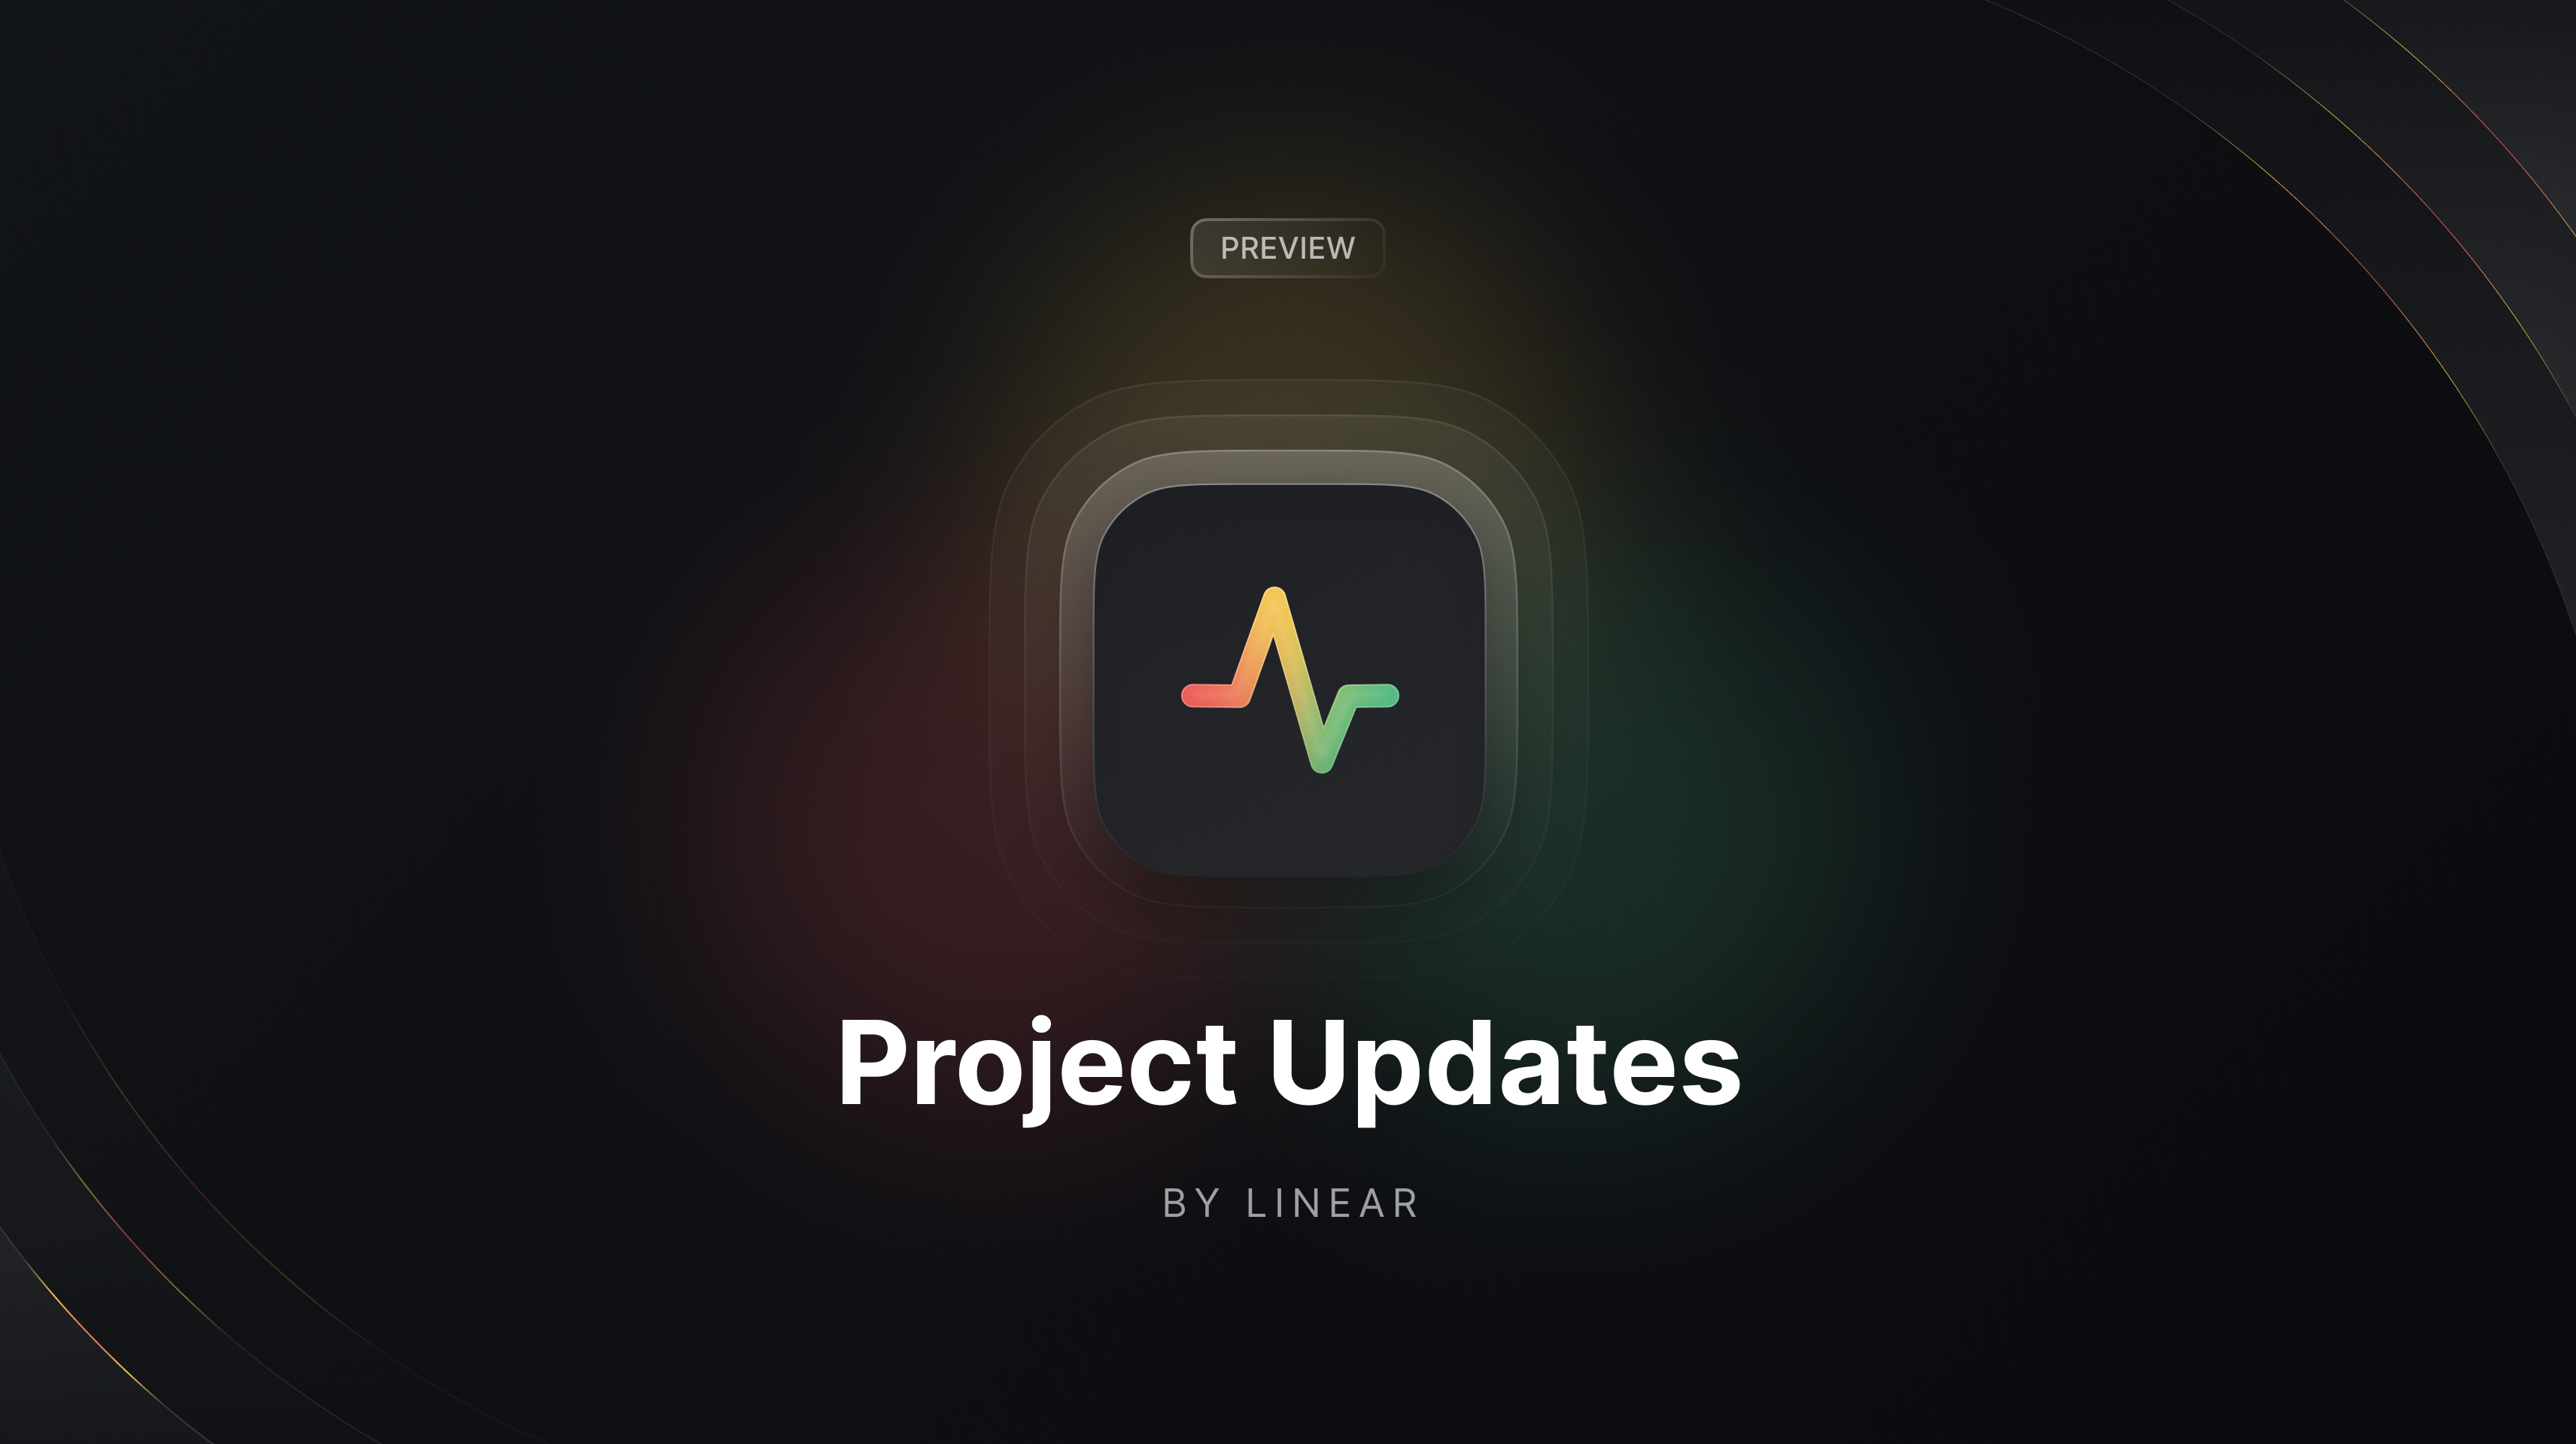 Project updates promotional image with activity icon